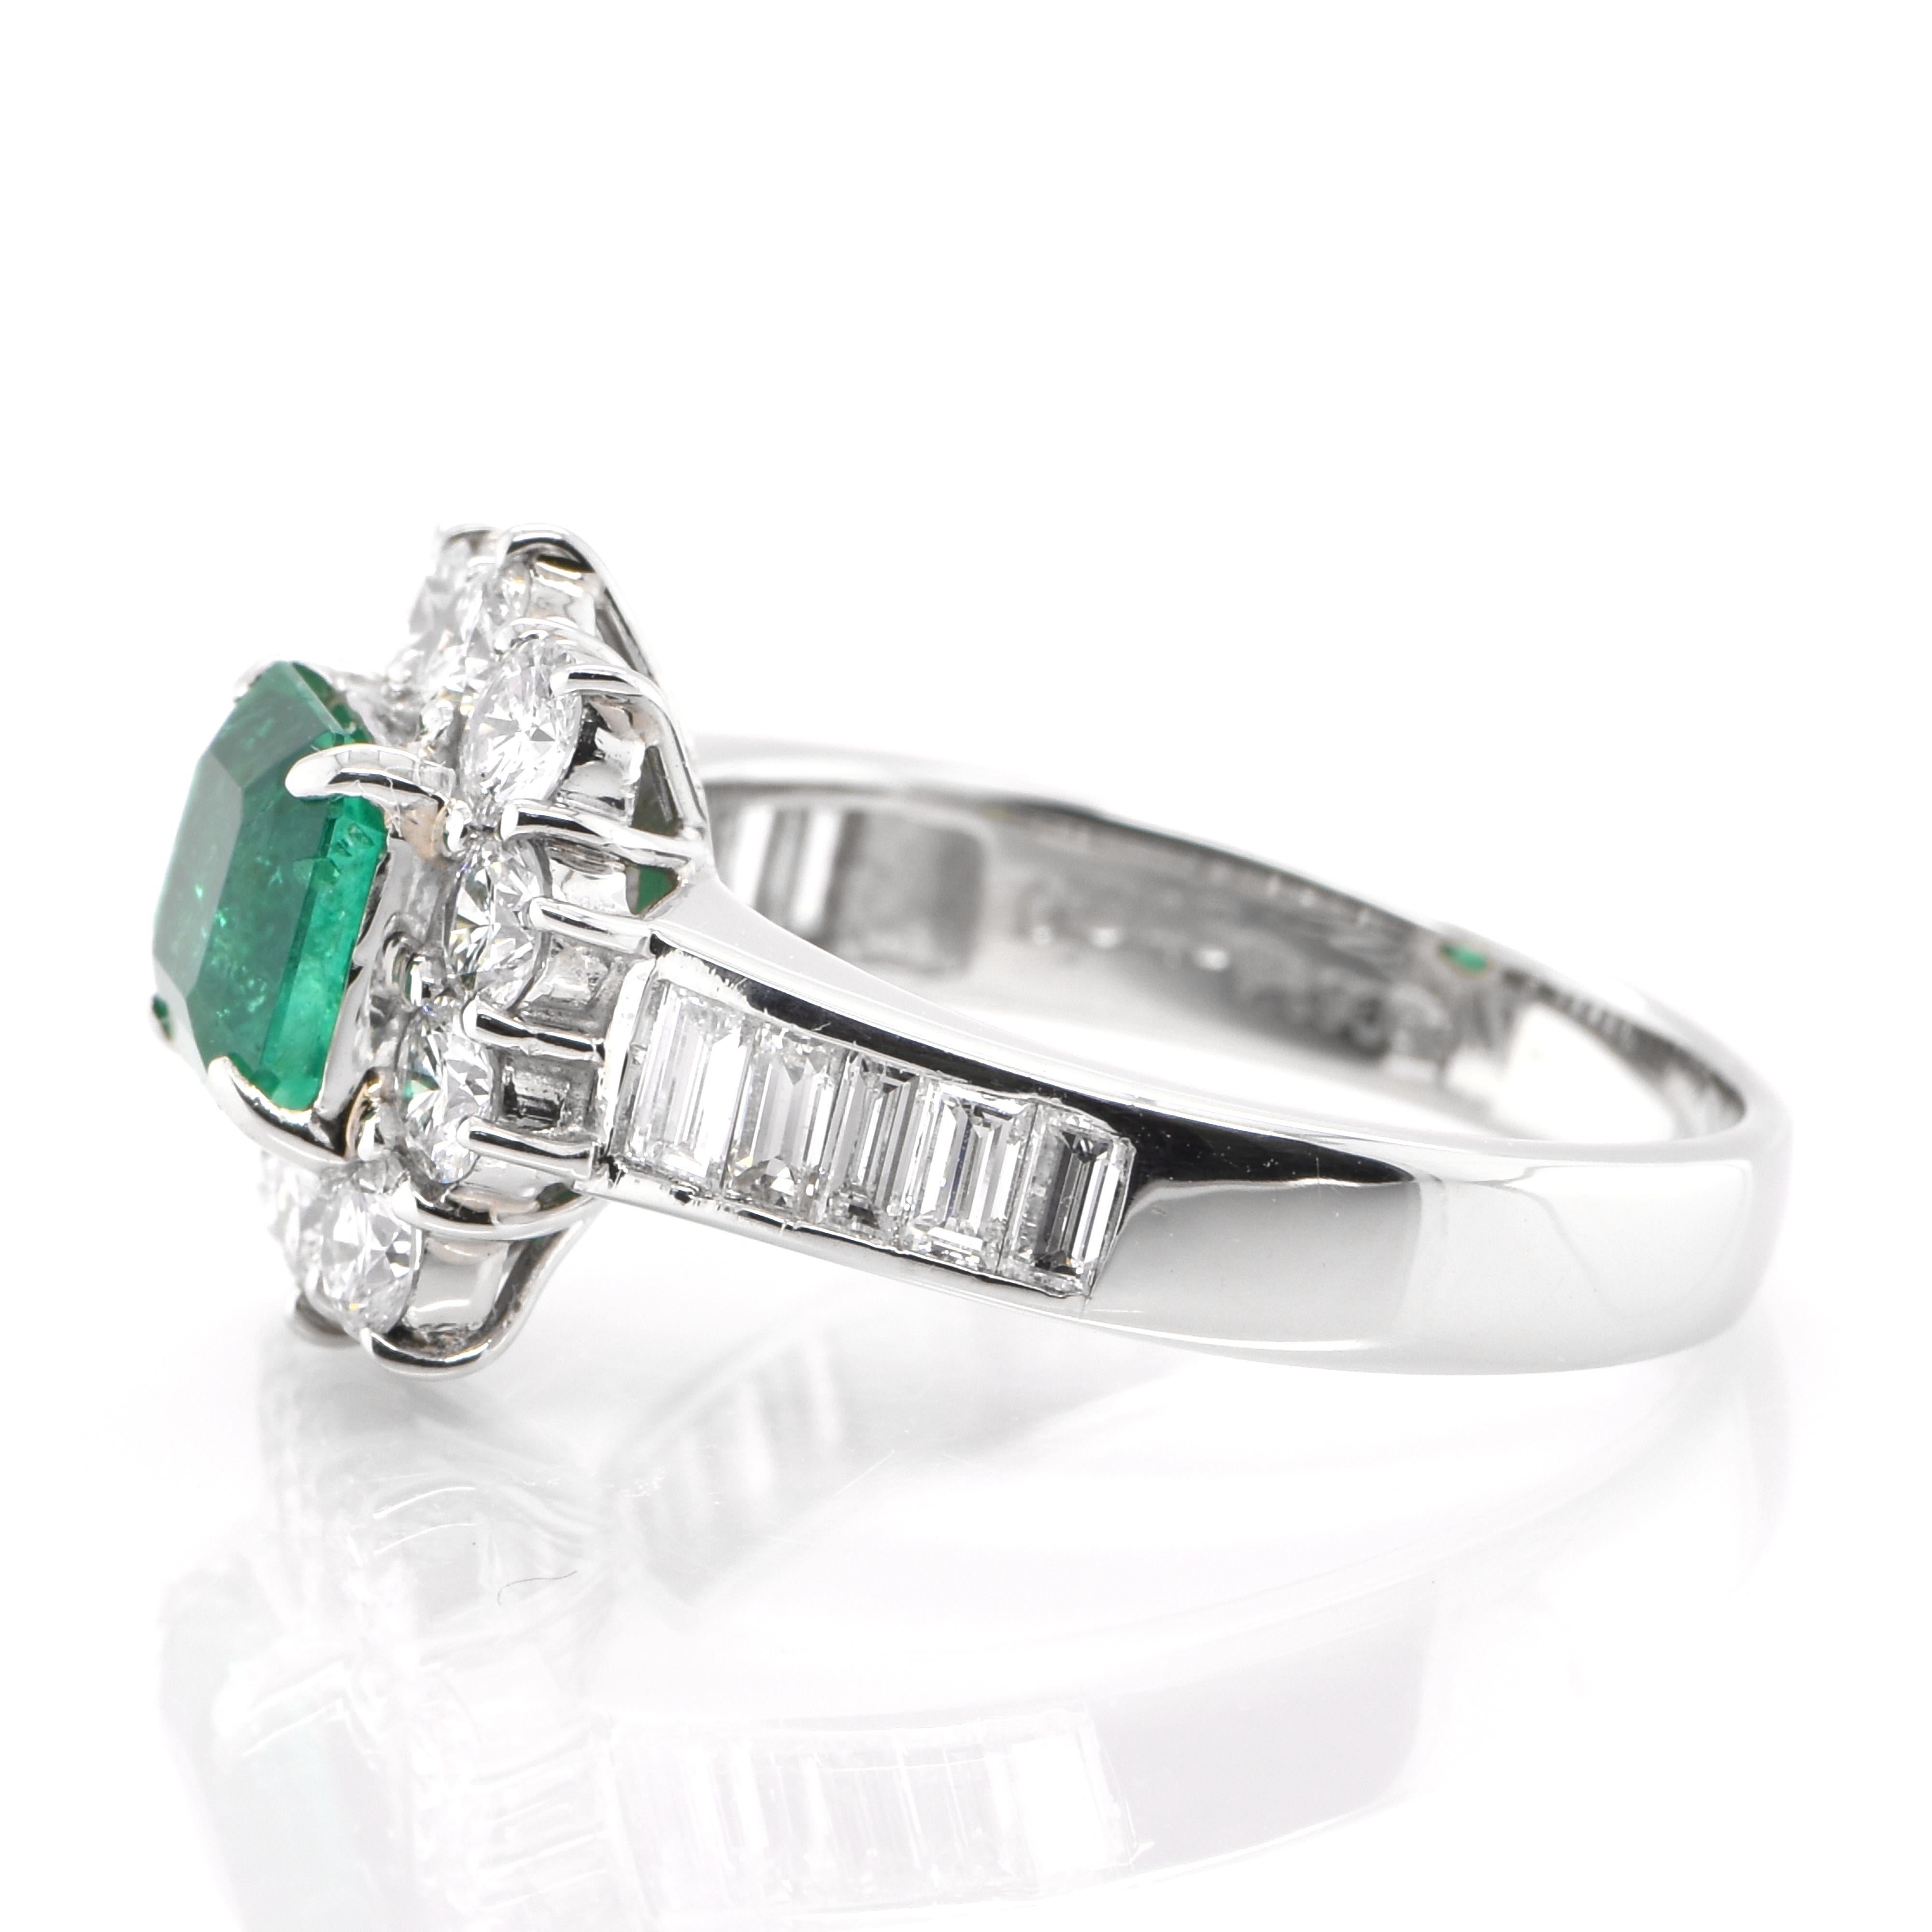 Emerald Cut 0.94 Carat Natural Emerald and Diamond Halo Ring Set in Platinum For Sale